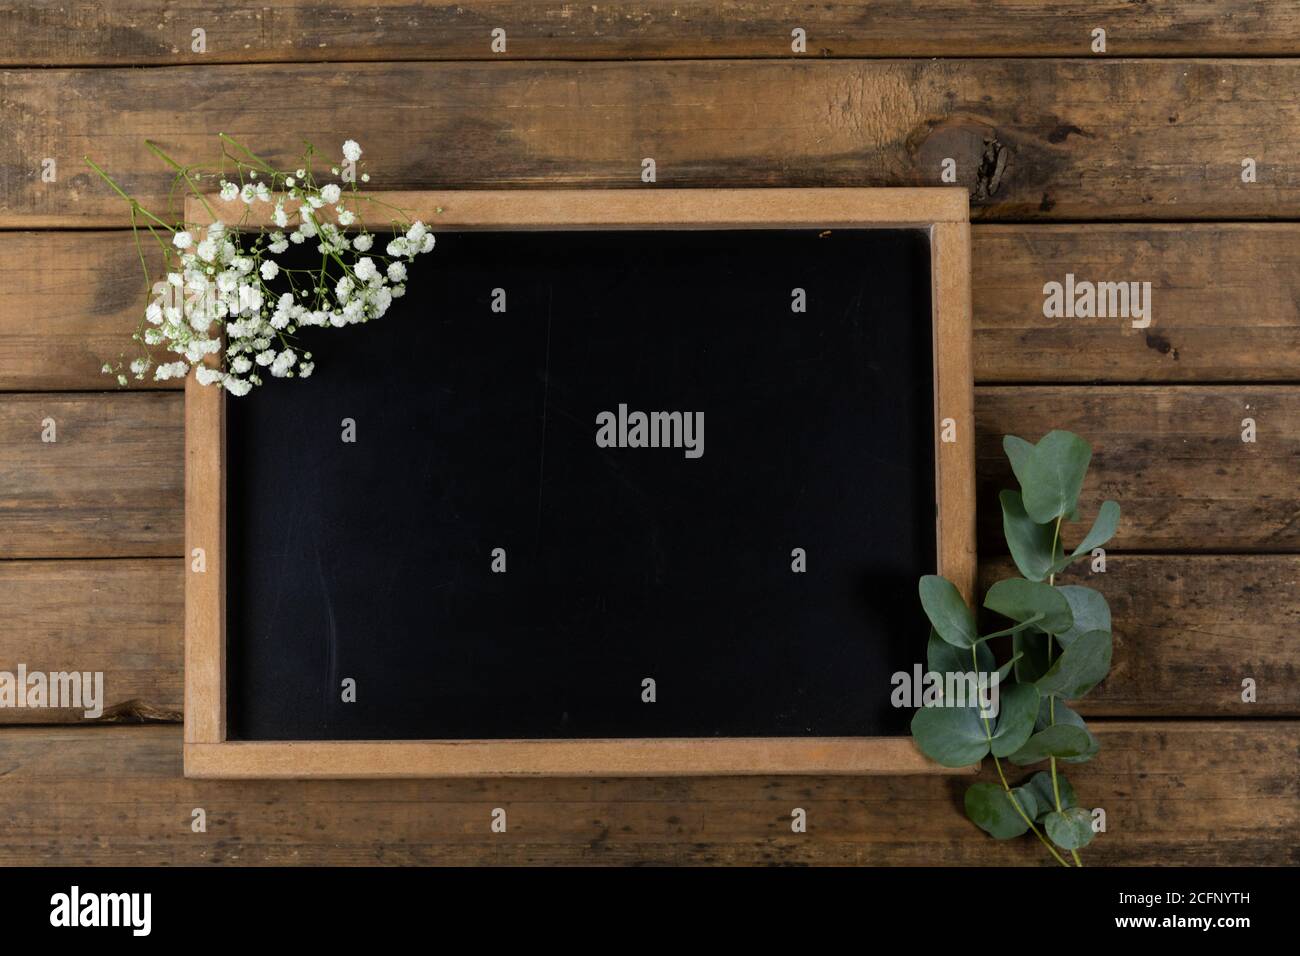 View of a black board surrounded by flowers on wood table background Stock Photo